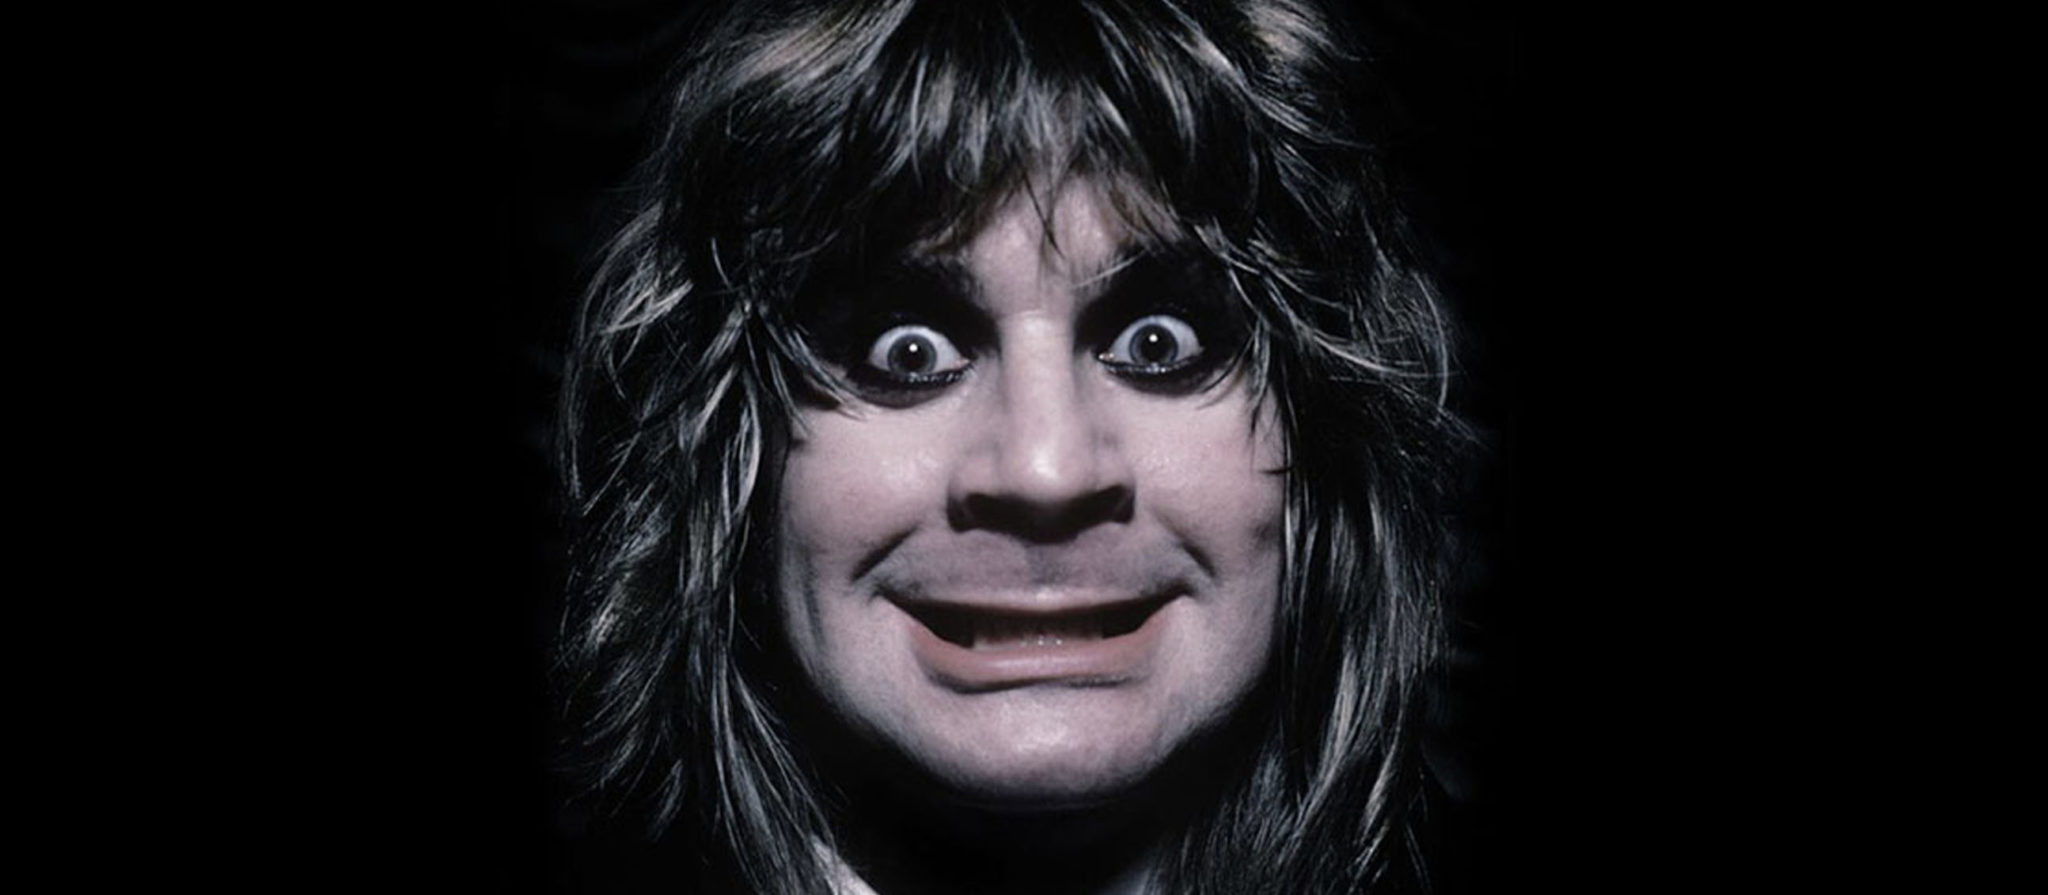 Wild Facts About Ozzy Osbourne